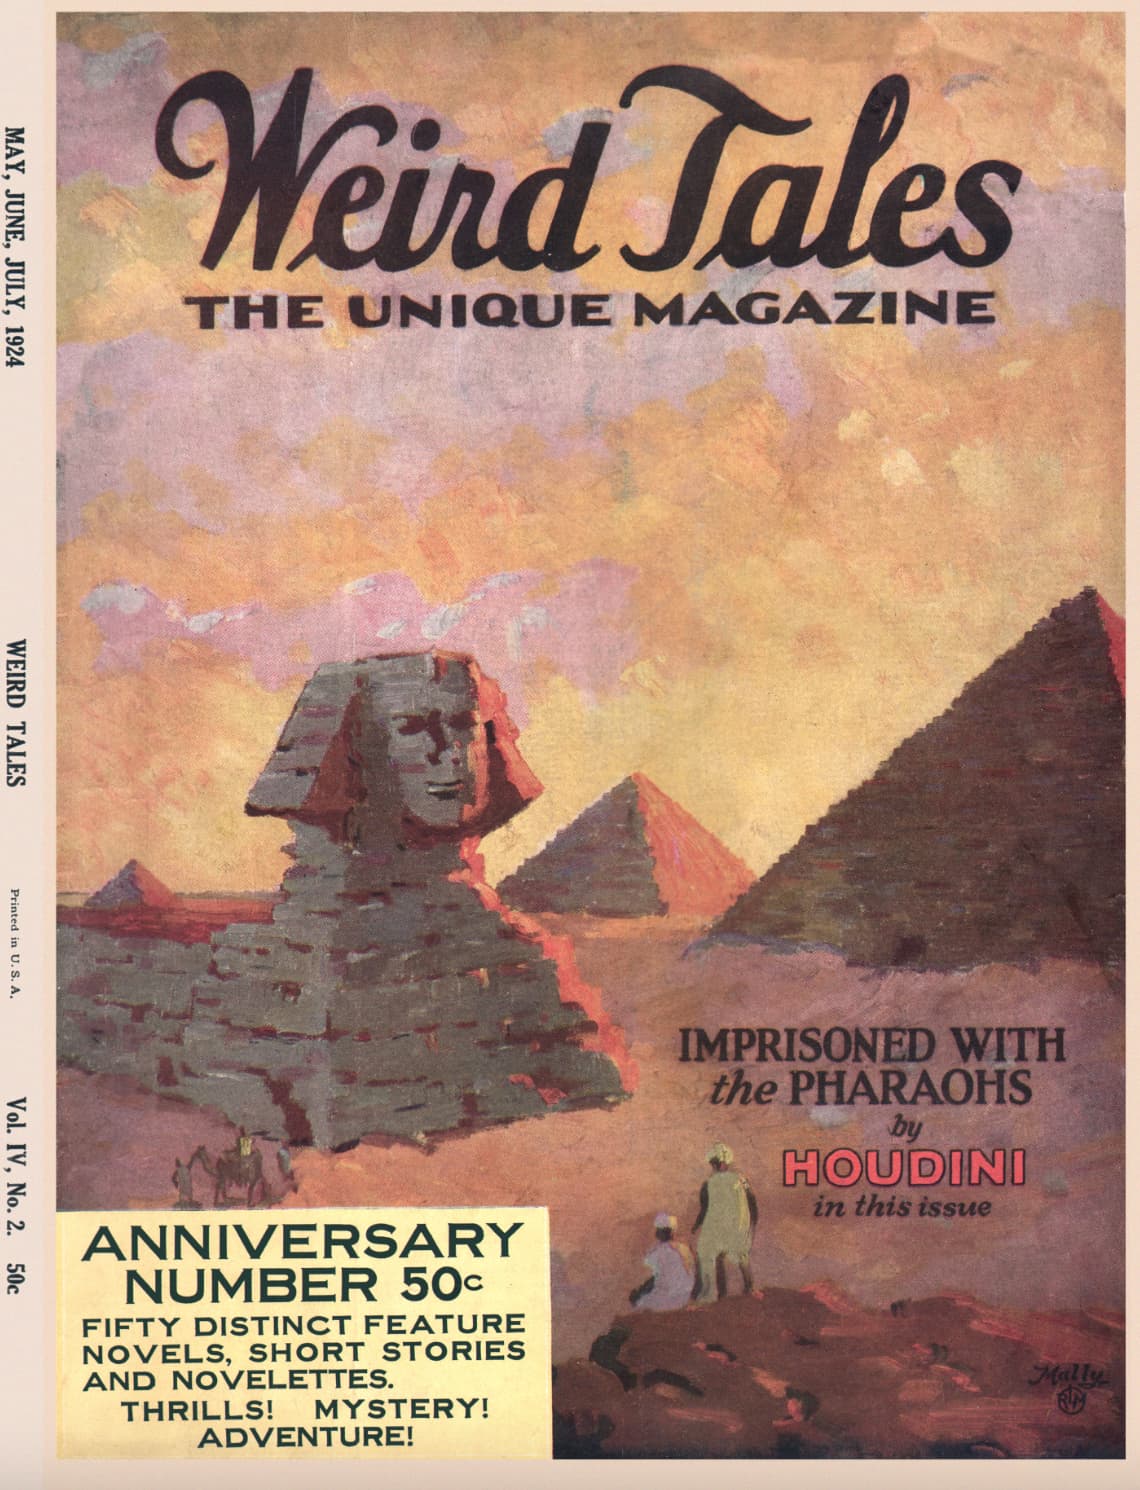 imprisoned with the pharaohs weird tales - Weird Tales The Unique Magazine May, June, Verad Weird Tales Printed in U.S. A. Vol. Iv, No. 2. 50c Imprisoned With the Pharaohs by Houdini in this issue Anniversary Number 50c Fifty Distinct Feature Novels, Shor